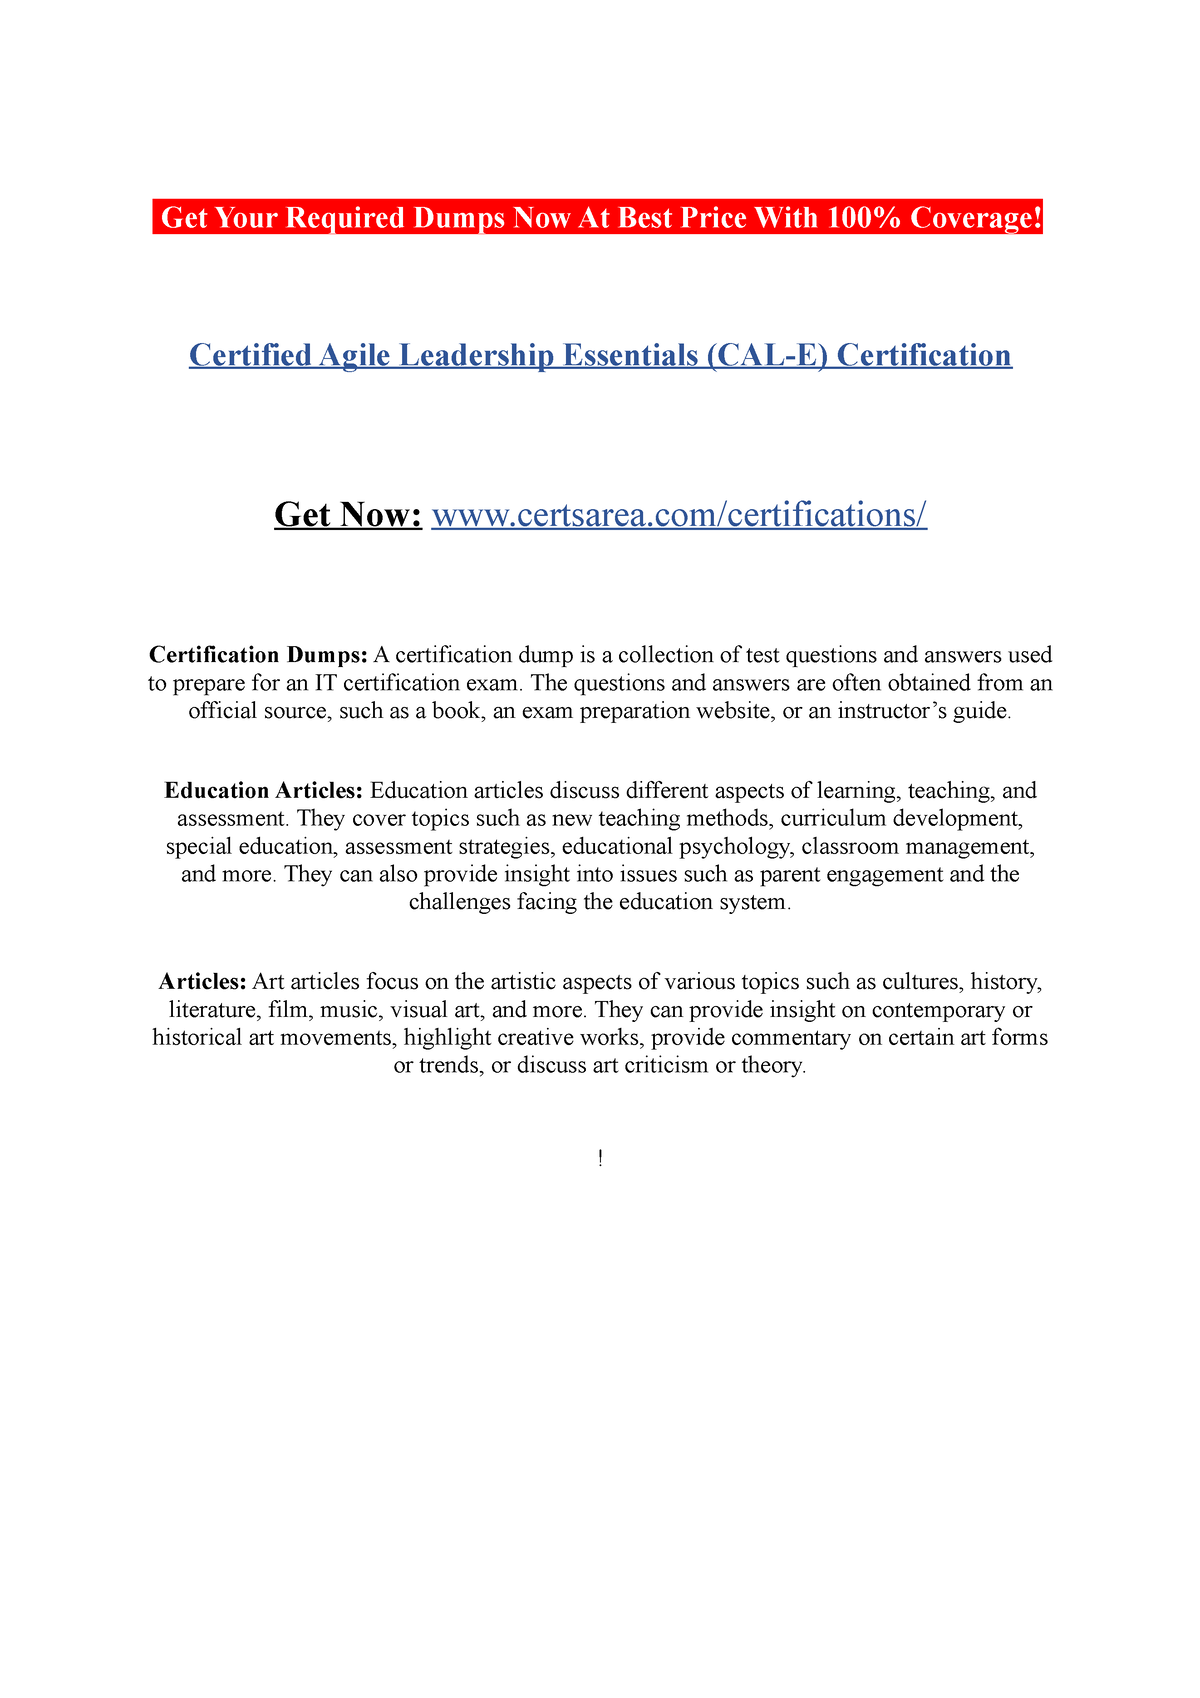 Certified Agile Le adership Essentials (CAL E) Certification Get Your